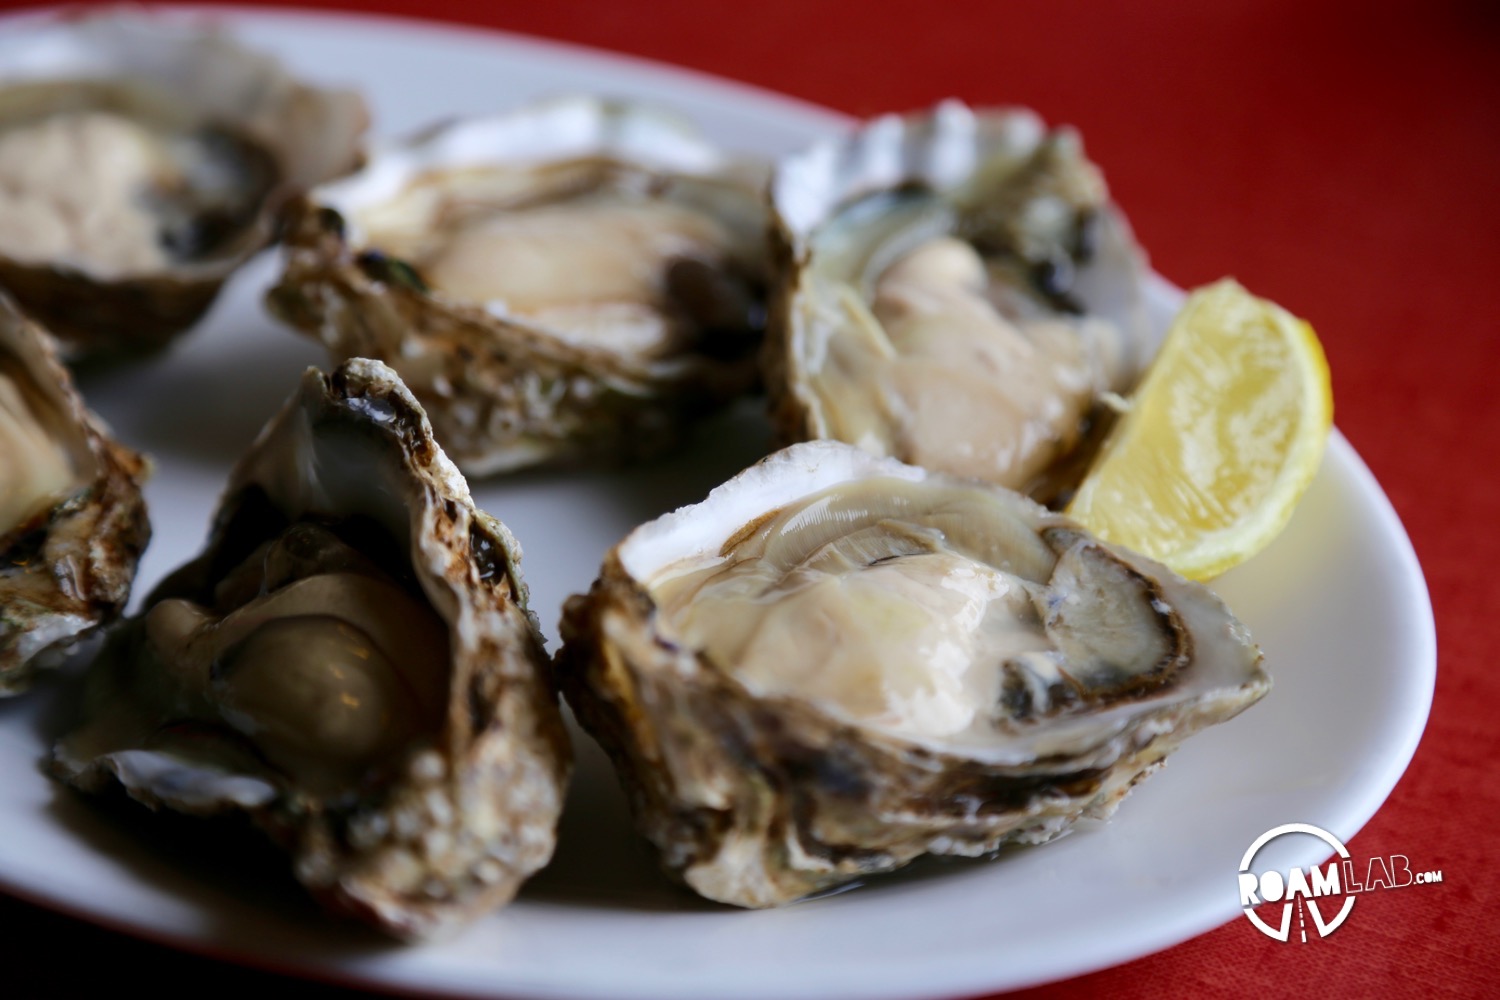 Washington Oysters for dinner.